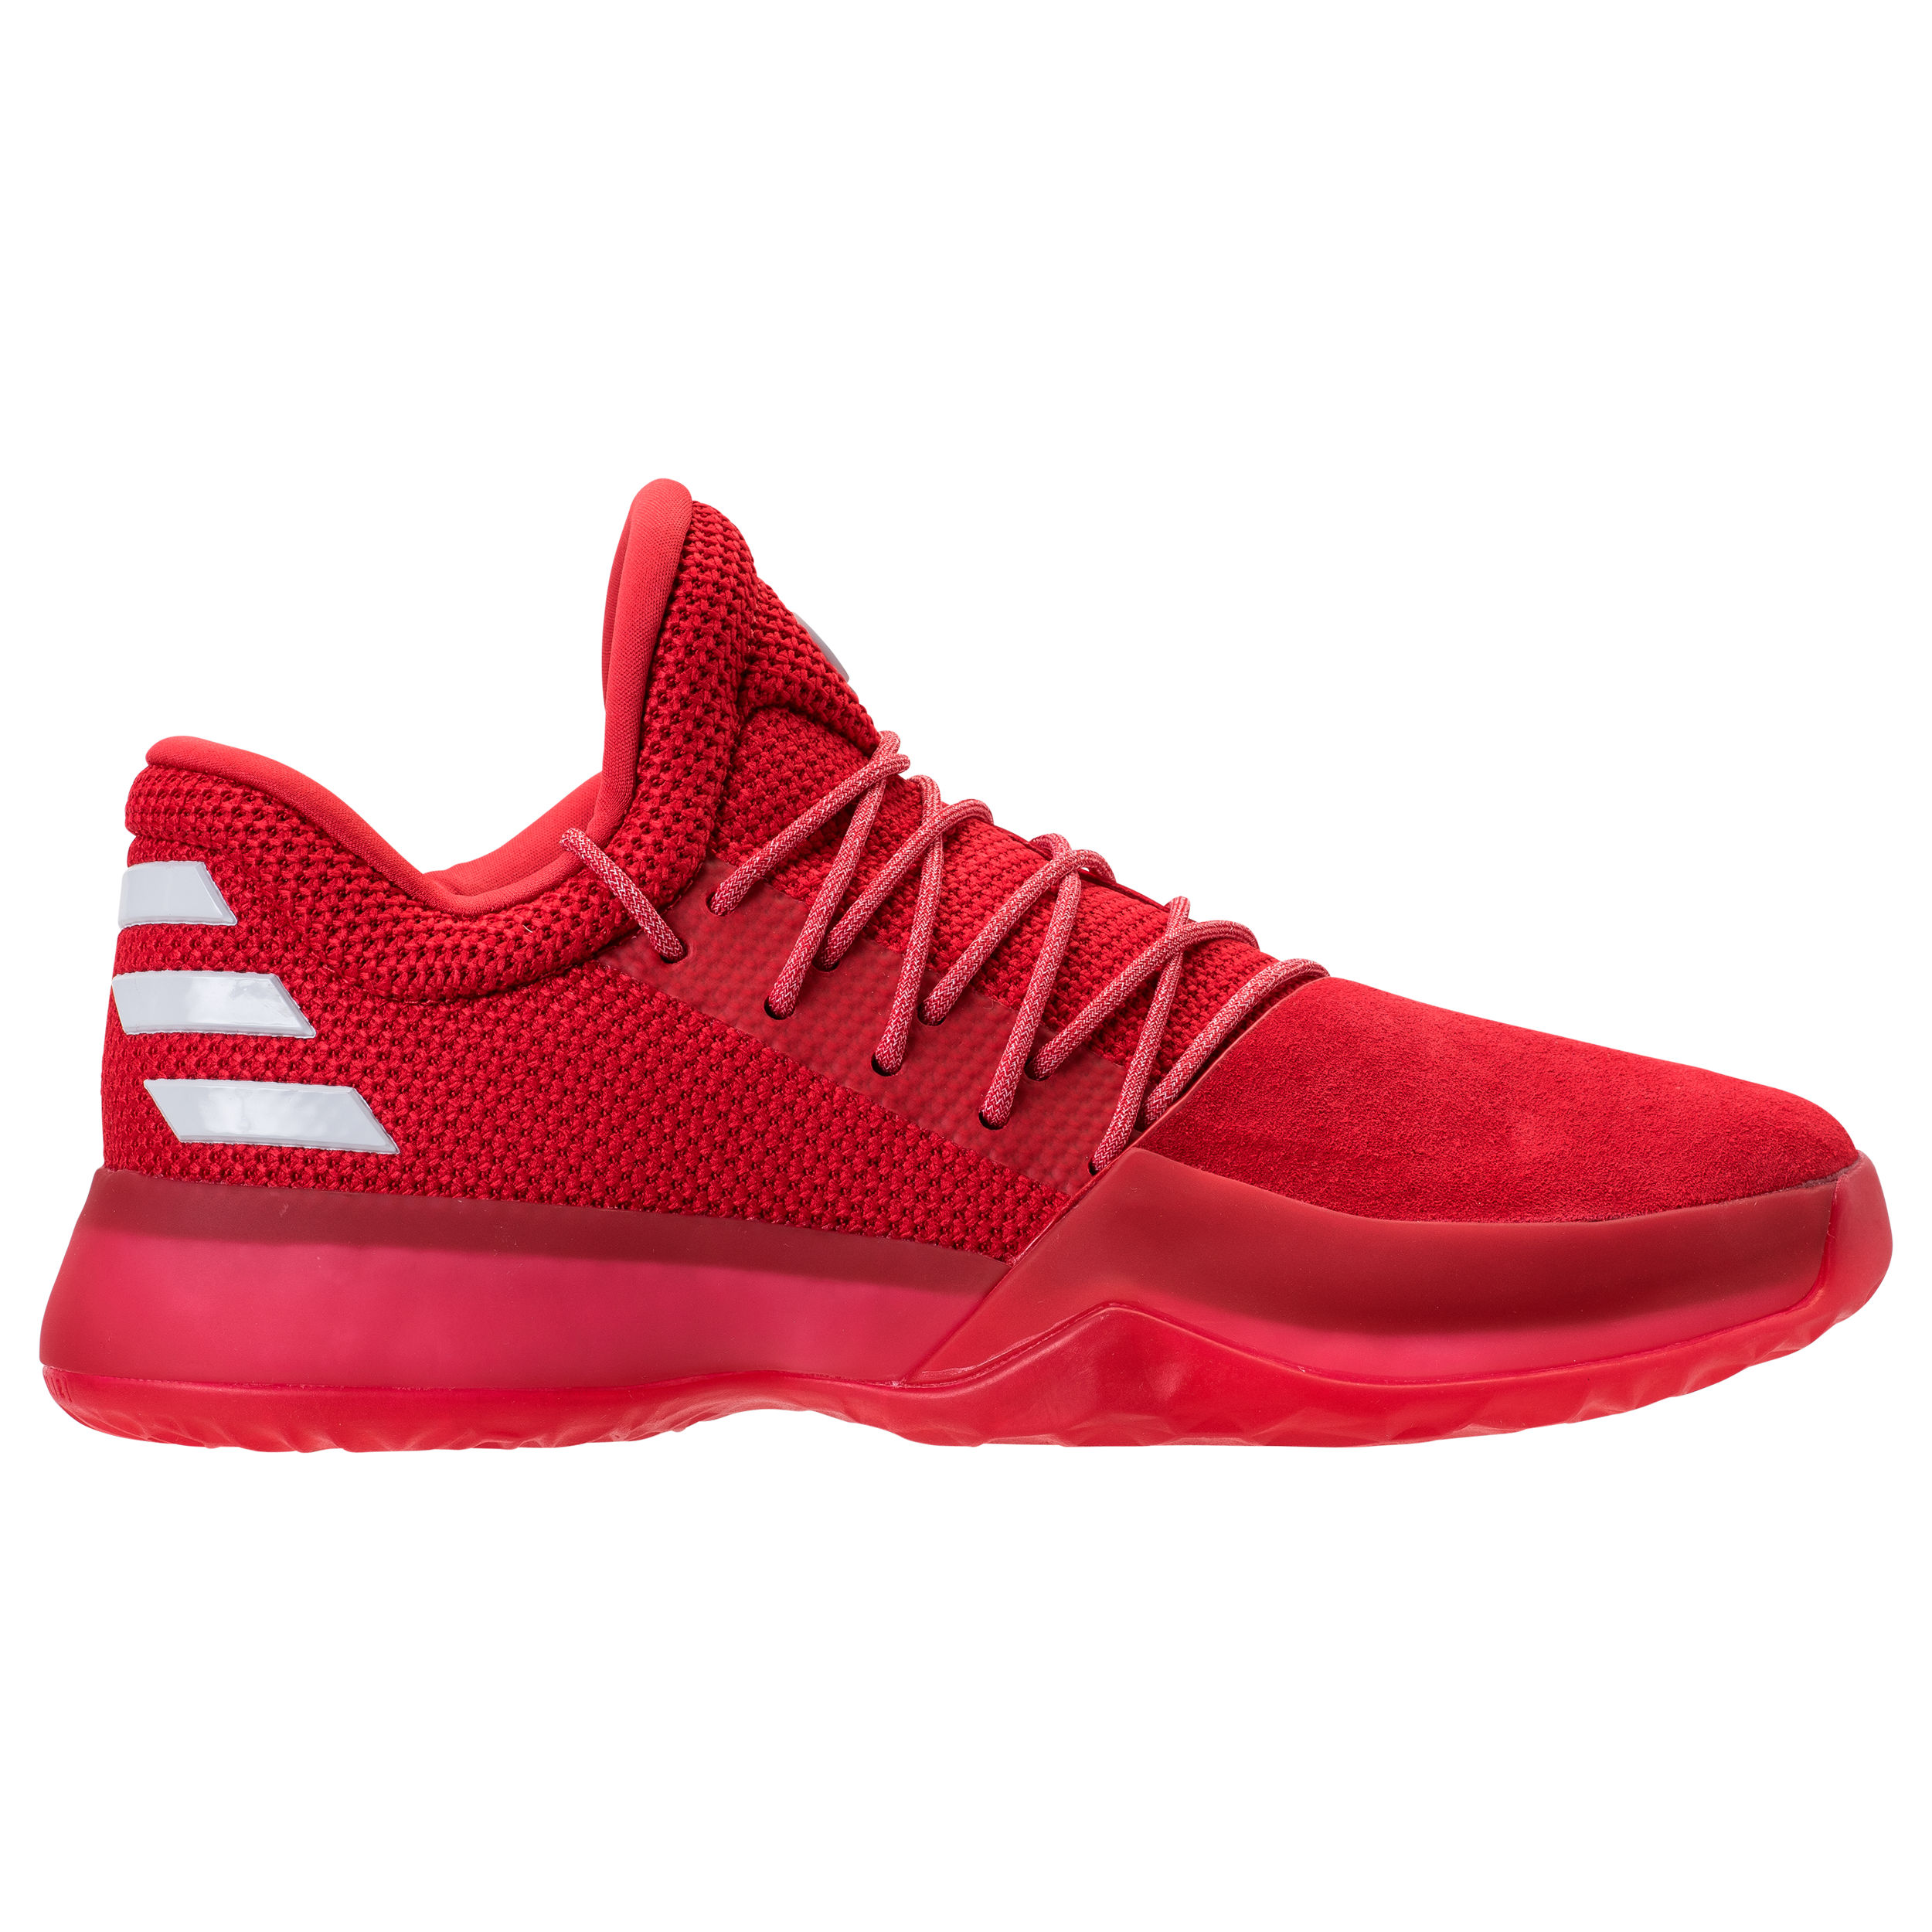 harden shoes 1